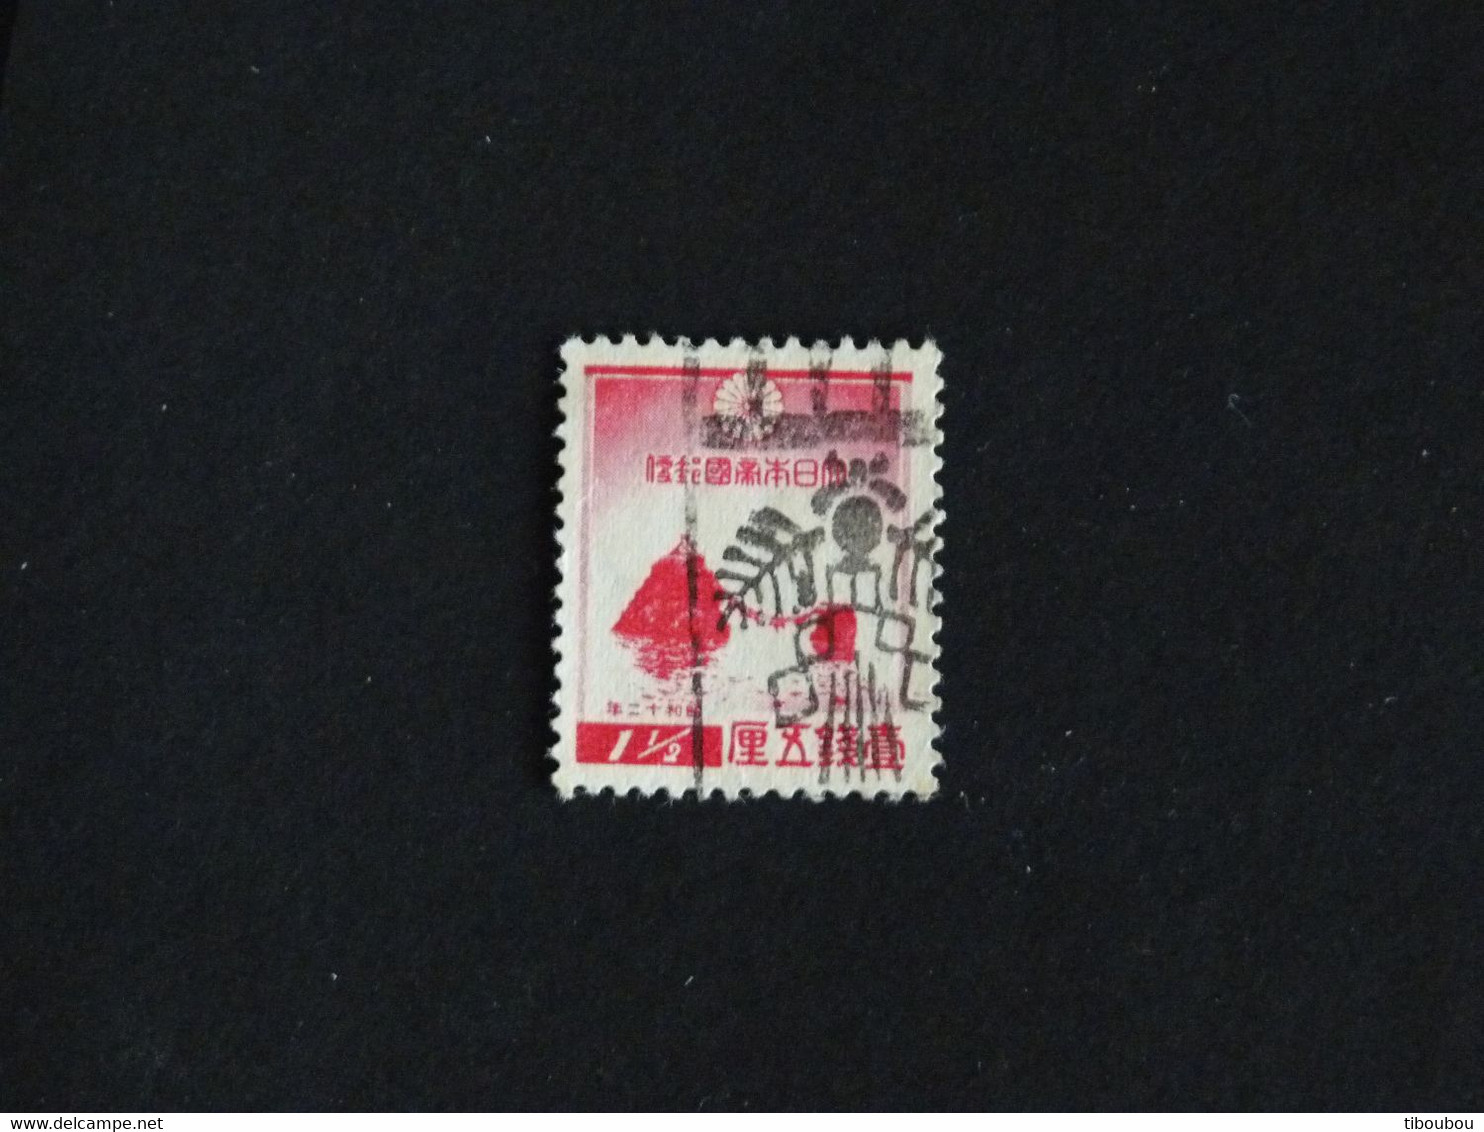 JAPON JAPAN NIPPON YT 238 OBLITERE - NOUVEL AN ROCHES FOUTAMIGAOURA - Gebraucht